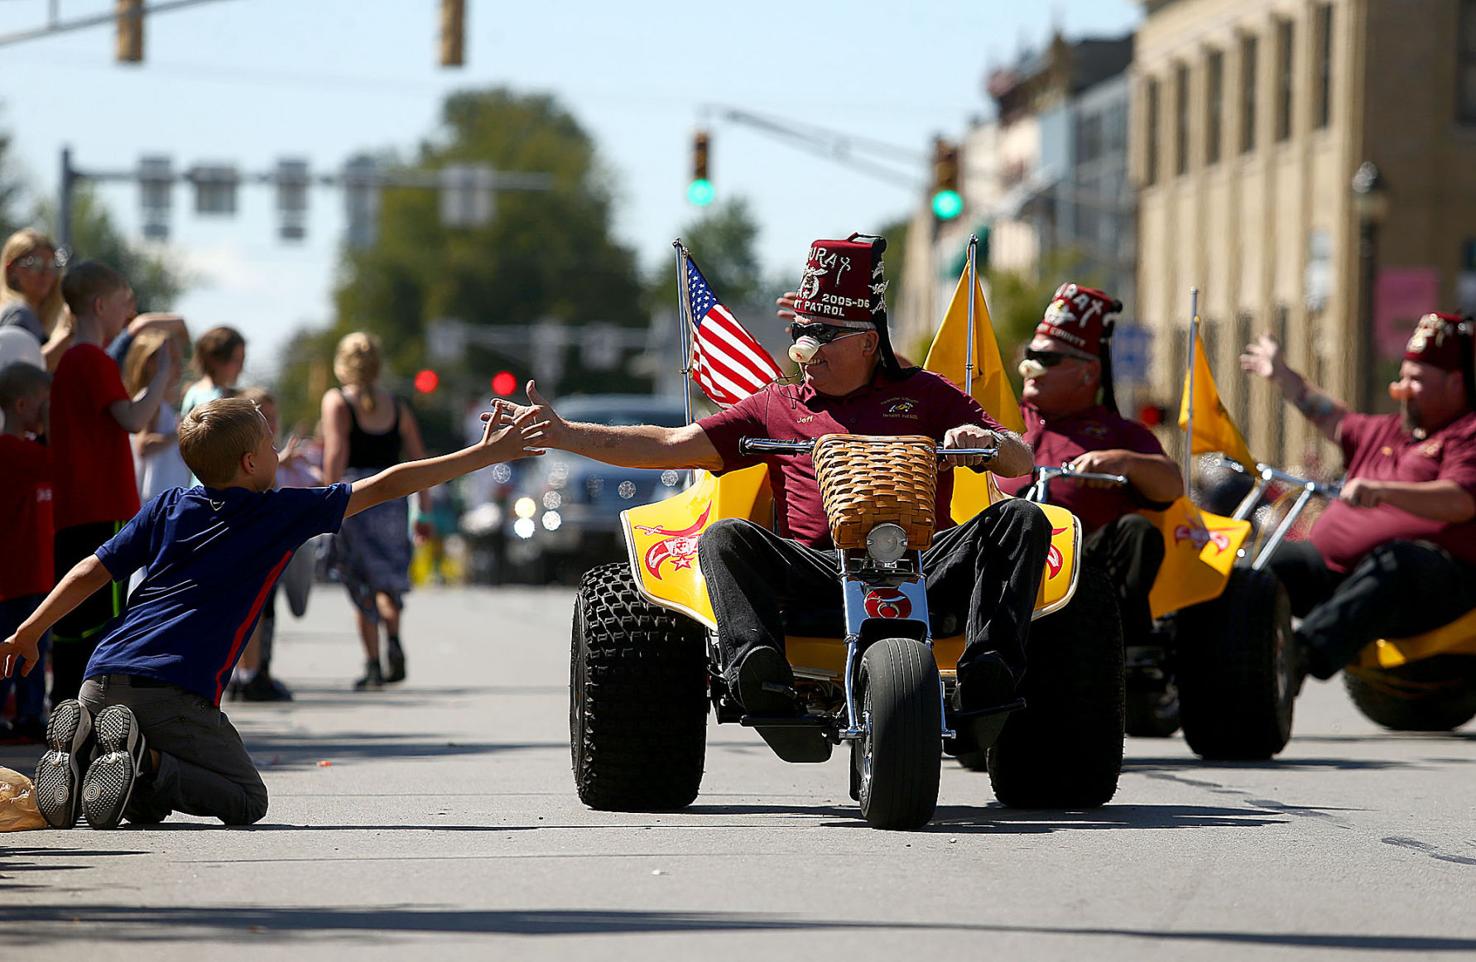 Tipton Pork Festival wraps up weekend; prepares for 50th year Local